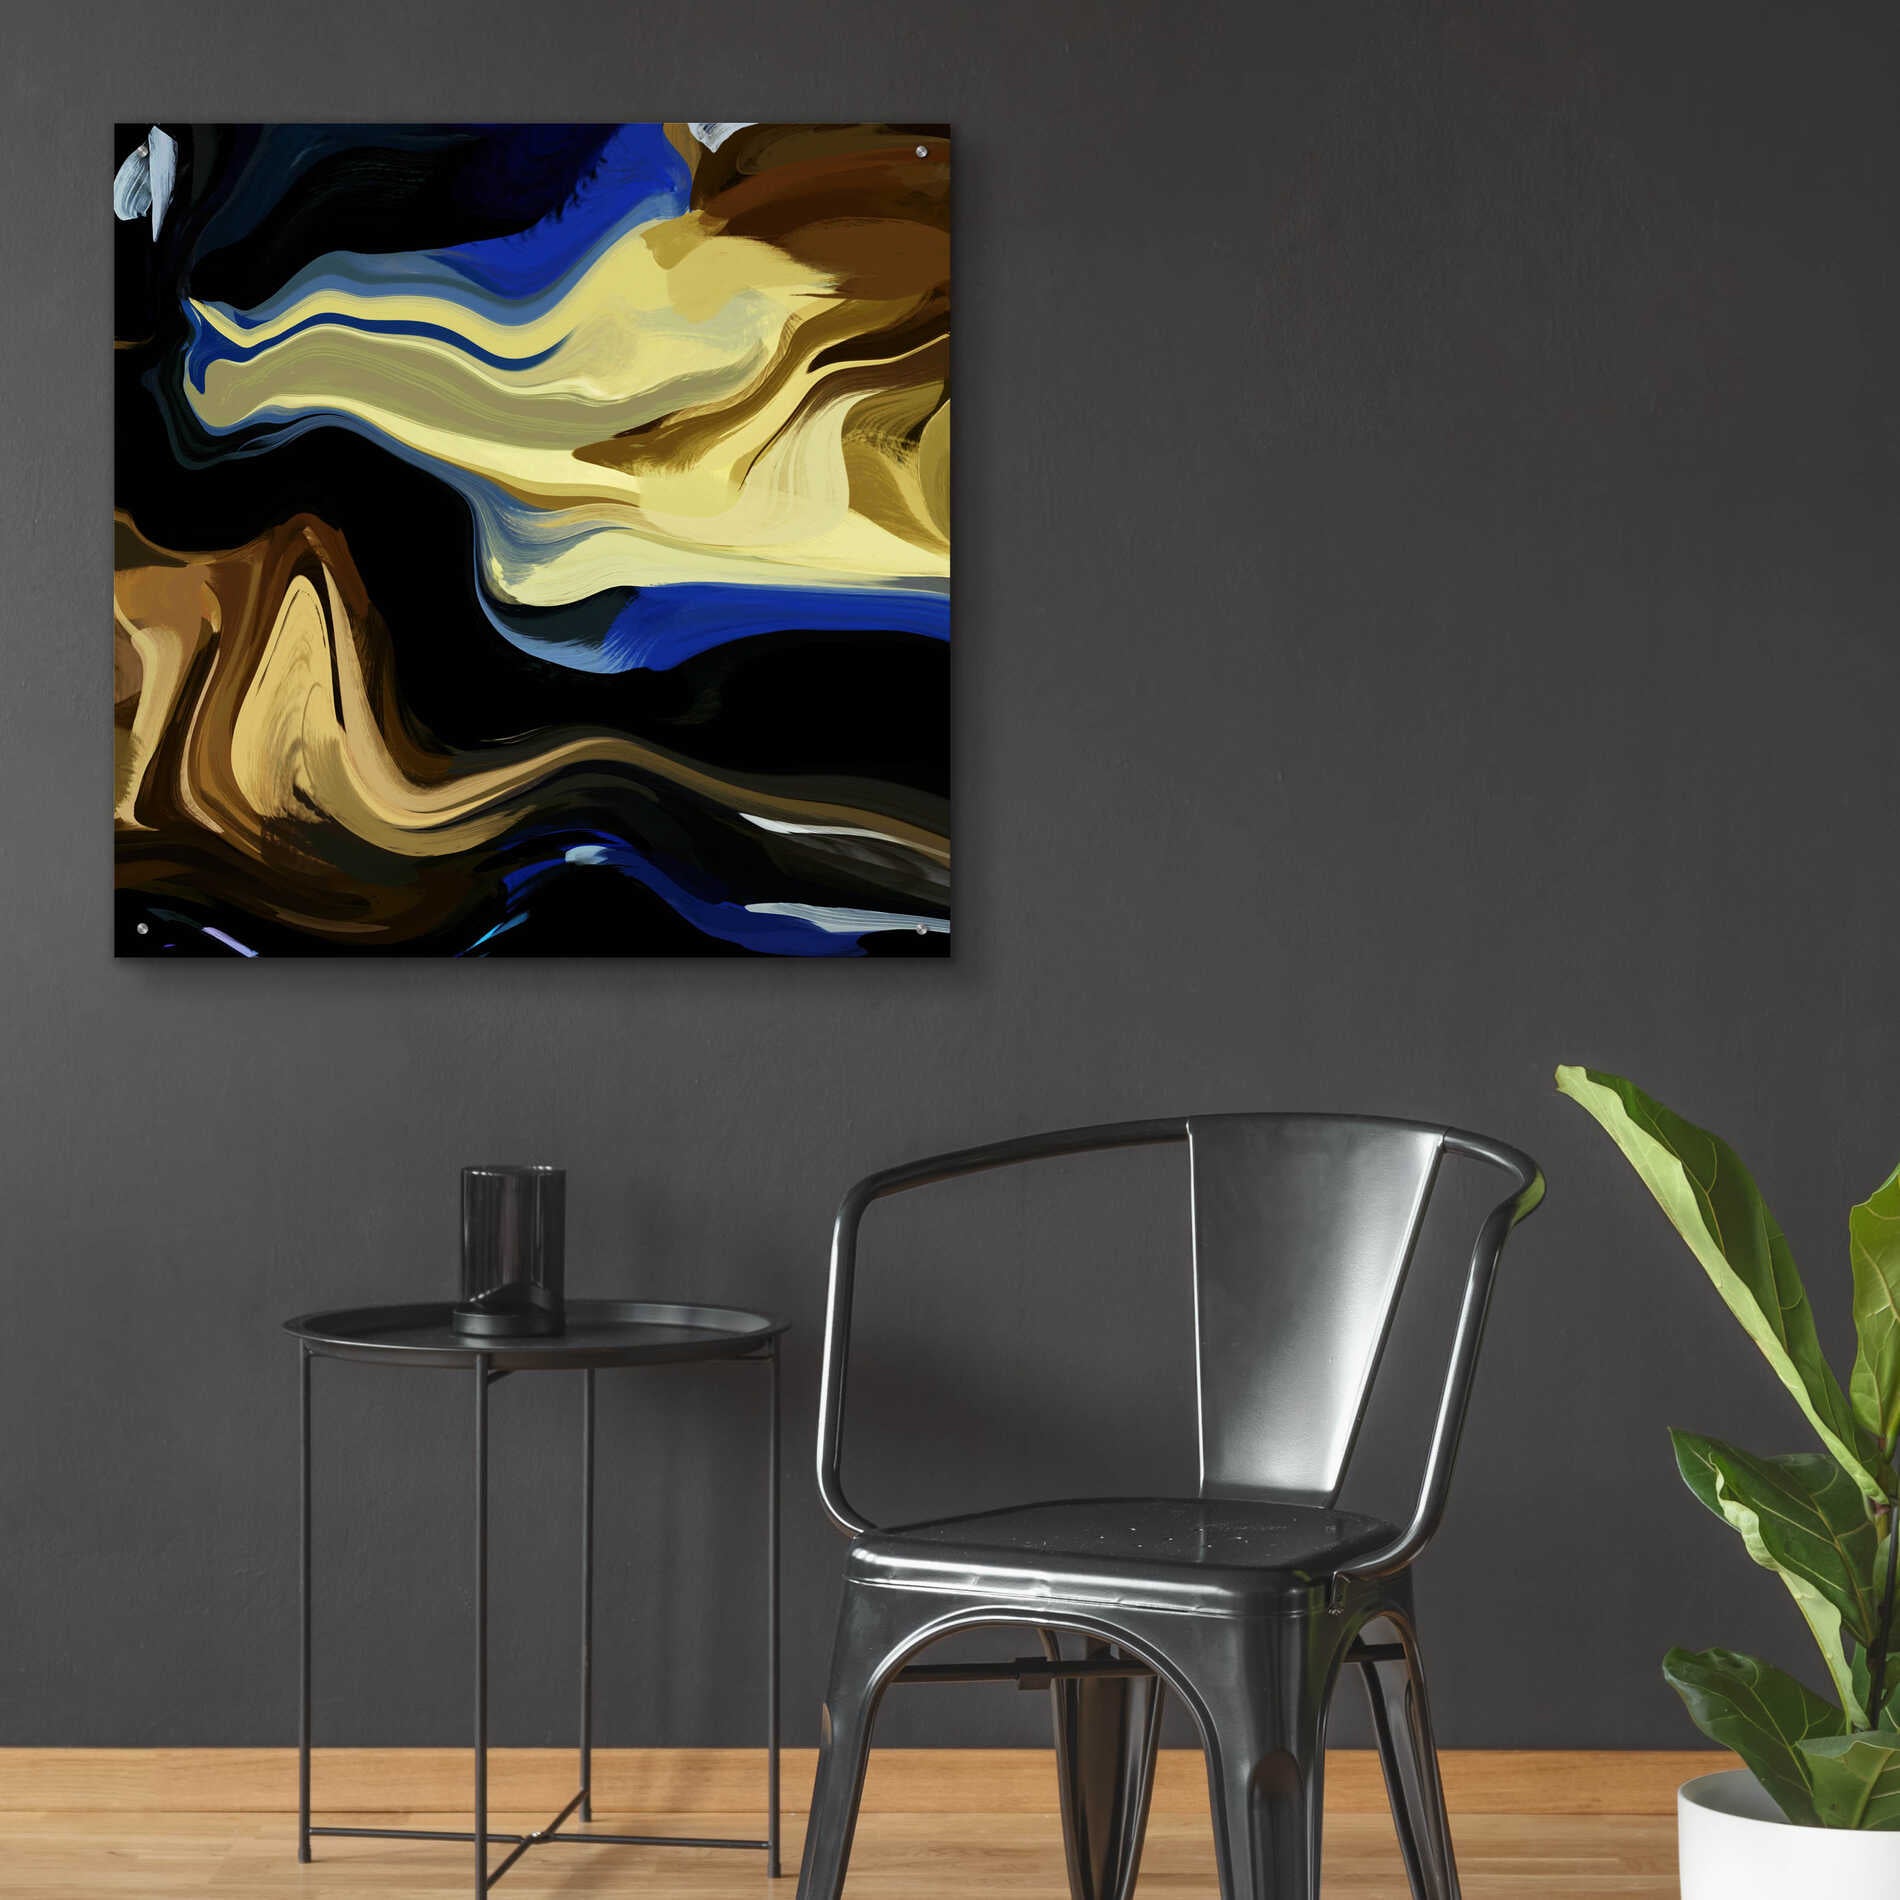 Epic Art 'Inverted Abstract Colorful Flows 16' by Irena Orlov Acrylic Glass Wall Art,36x36